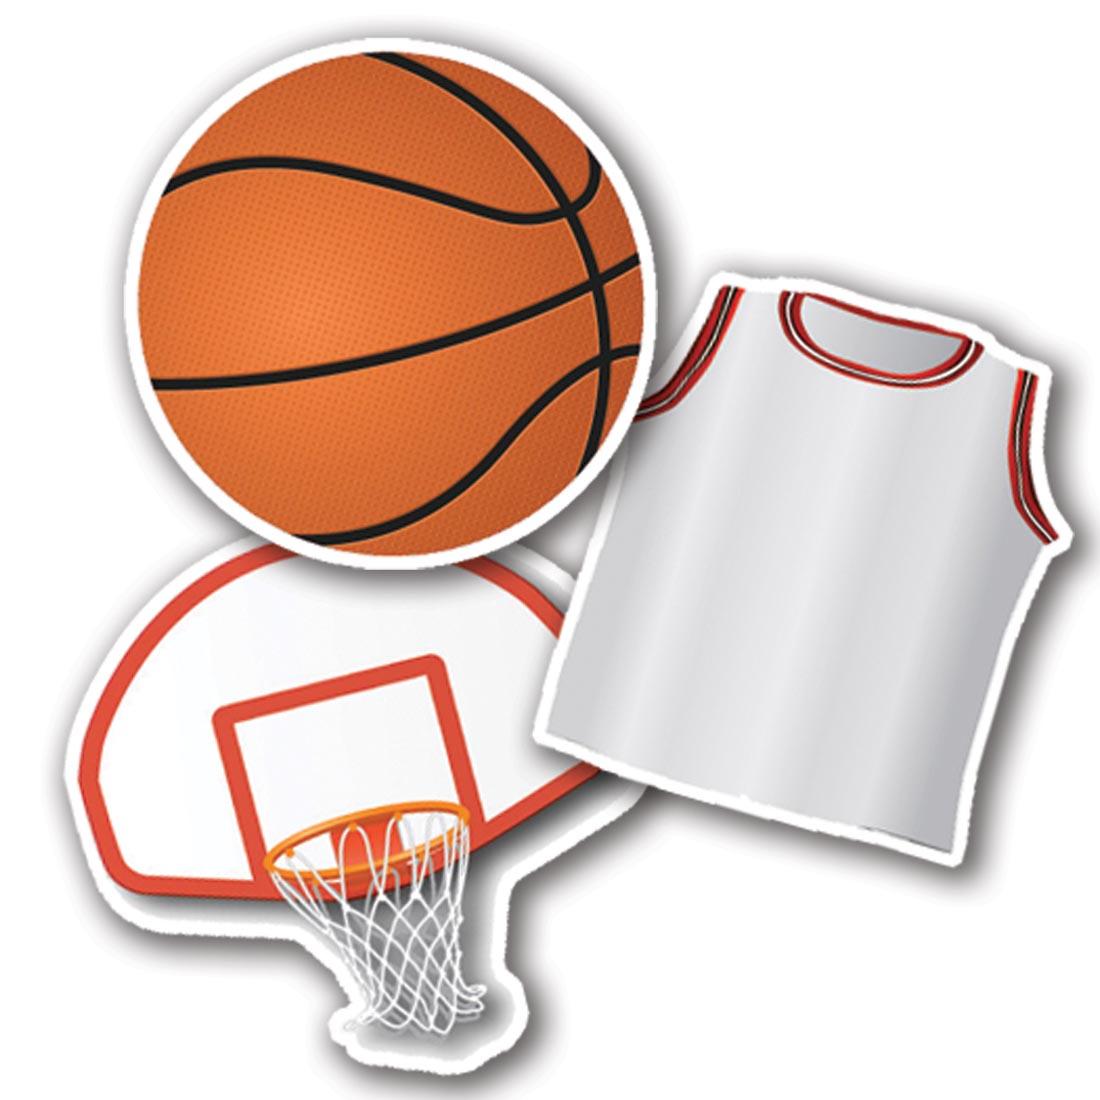 Assorted Paper Cut-Outs by Eureka have a Basketball, Jersey and Backboard with Hoop